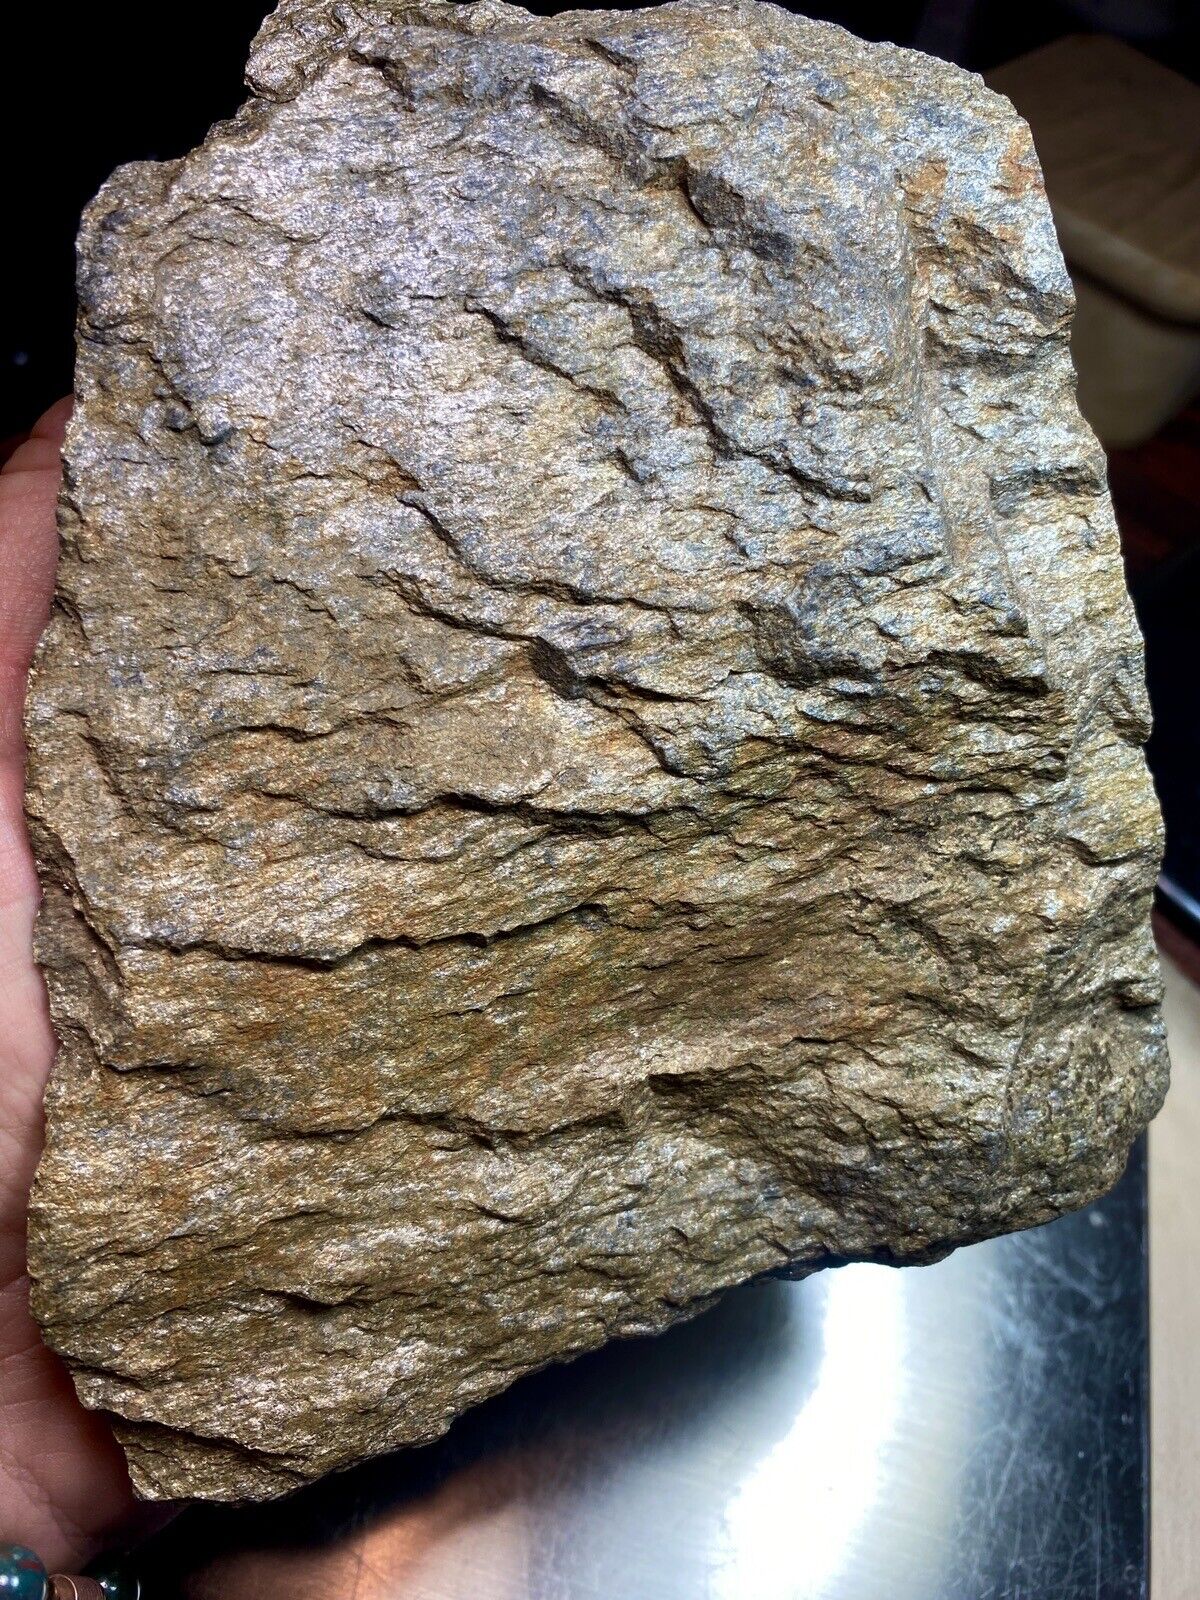 Gold Ore Display Stone Heavy w/ A lot Of Metals Showing 4+ Lbs Grade A